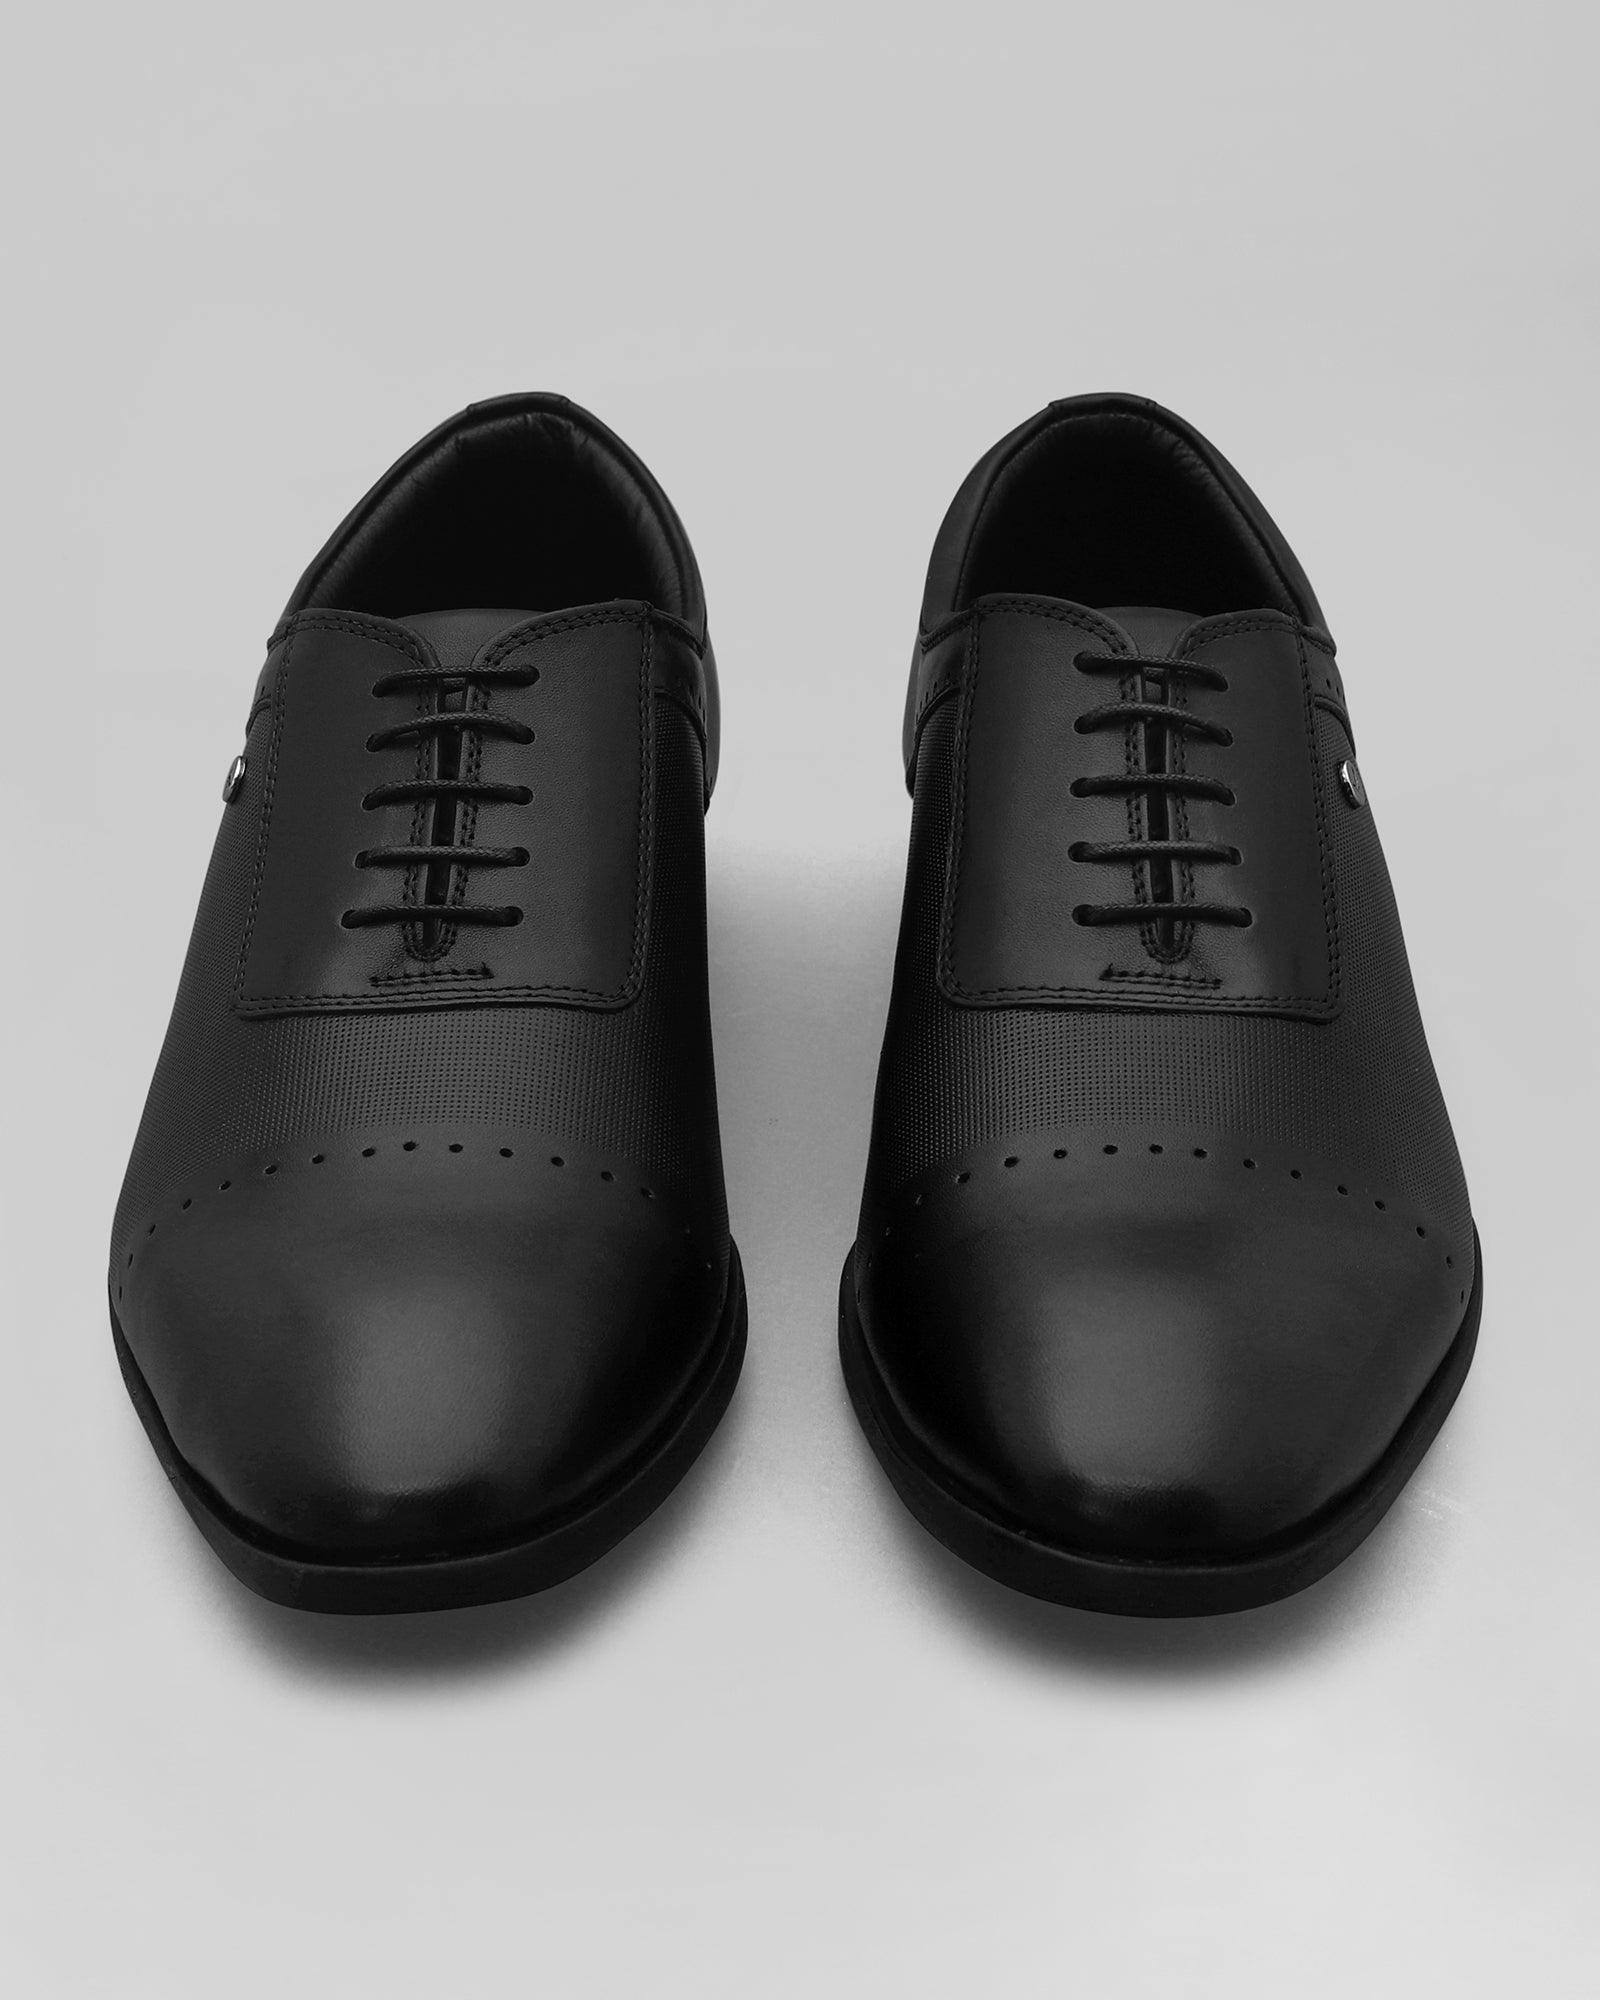 Must Haves Leather Black Textured Oxford Shoes - Kiwi